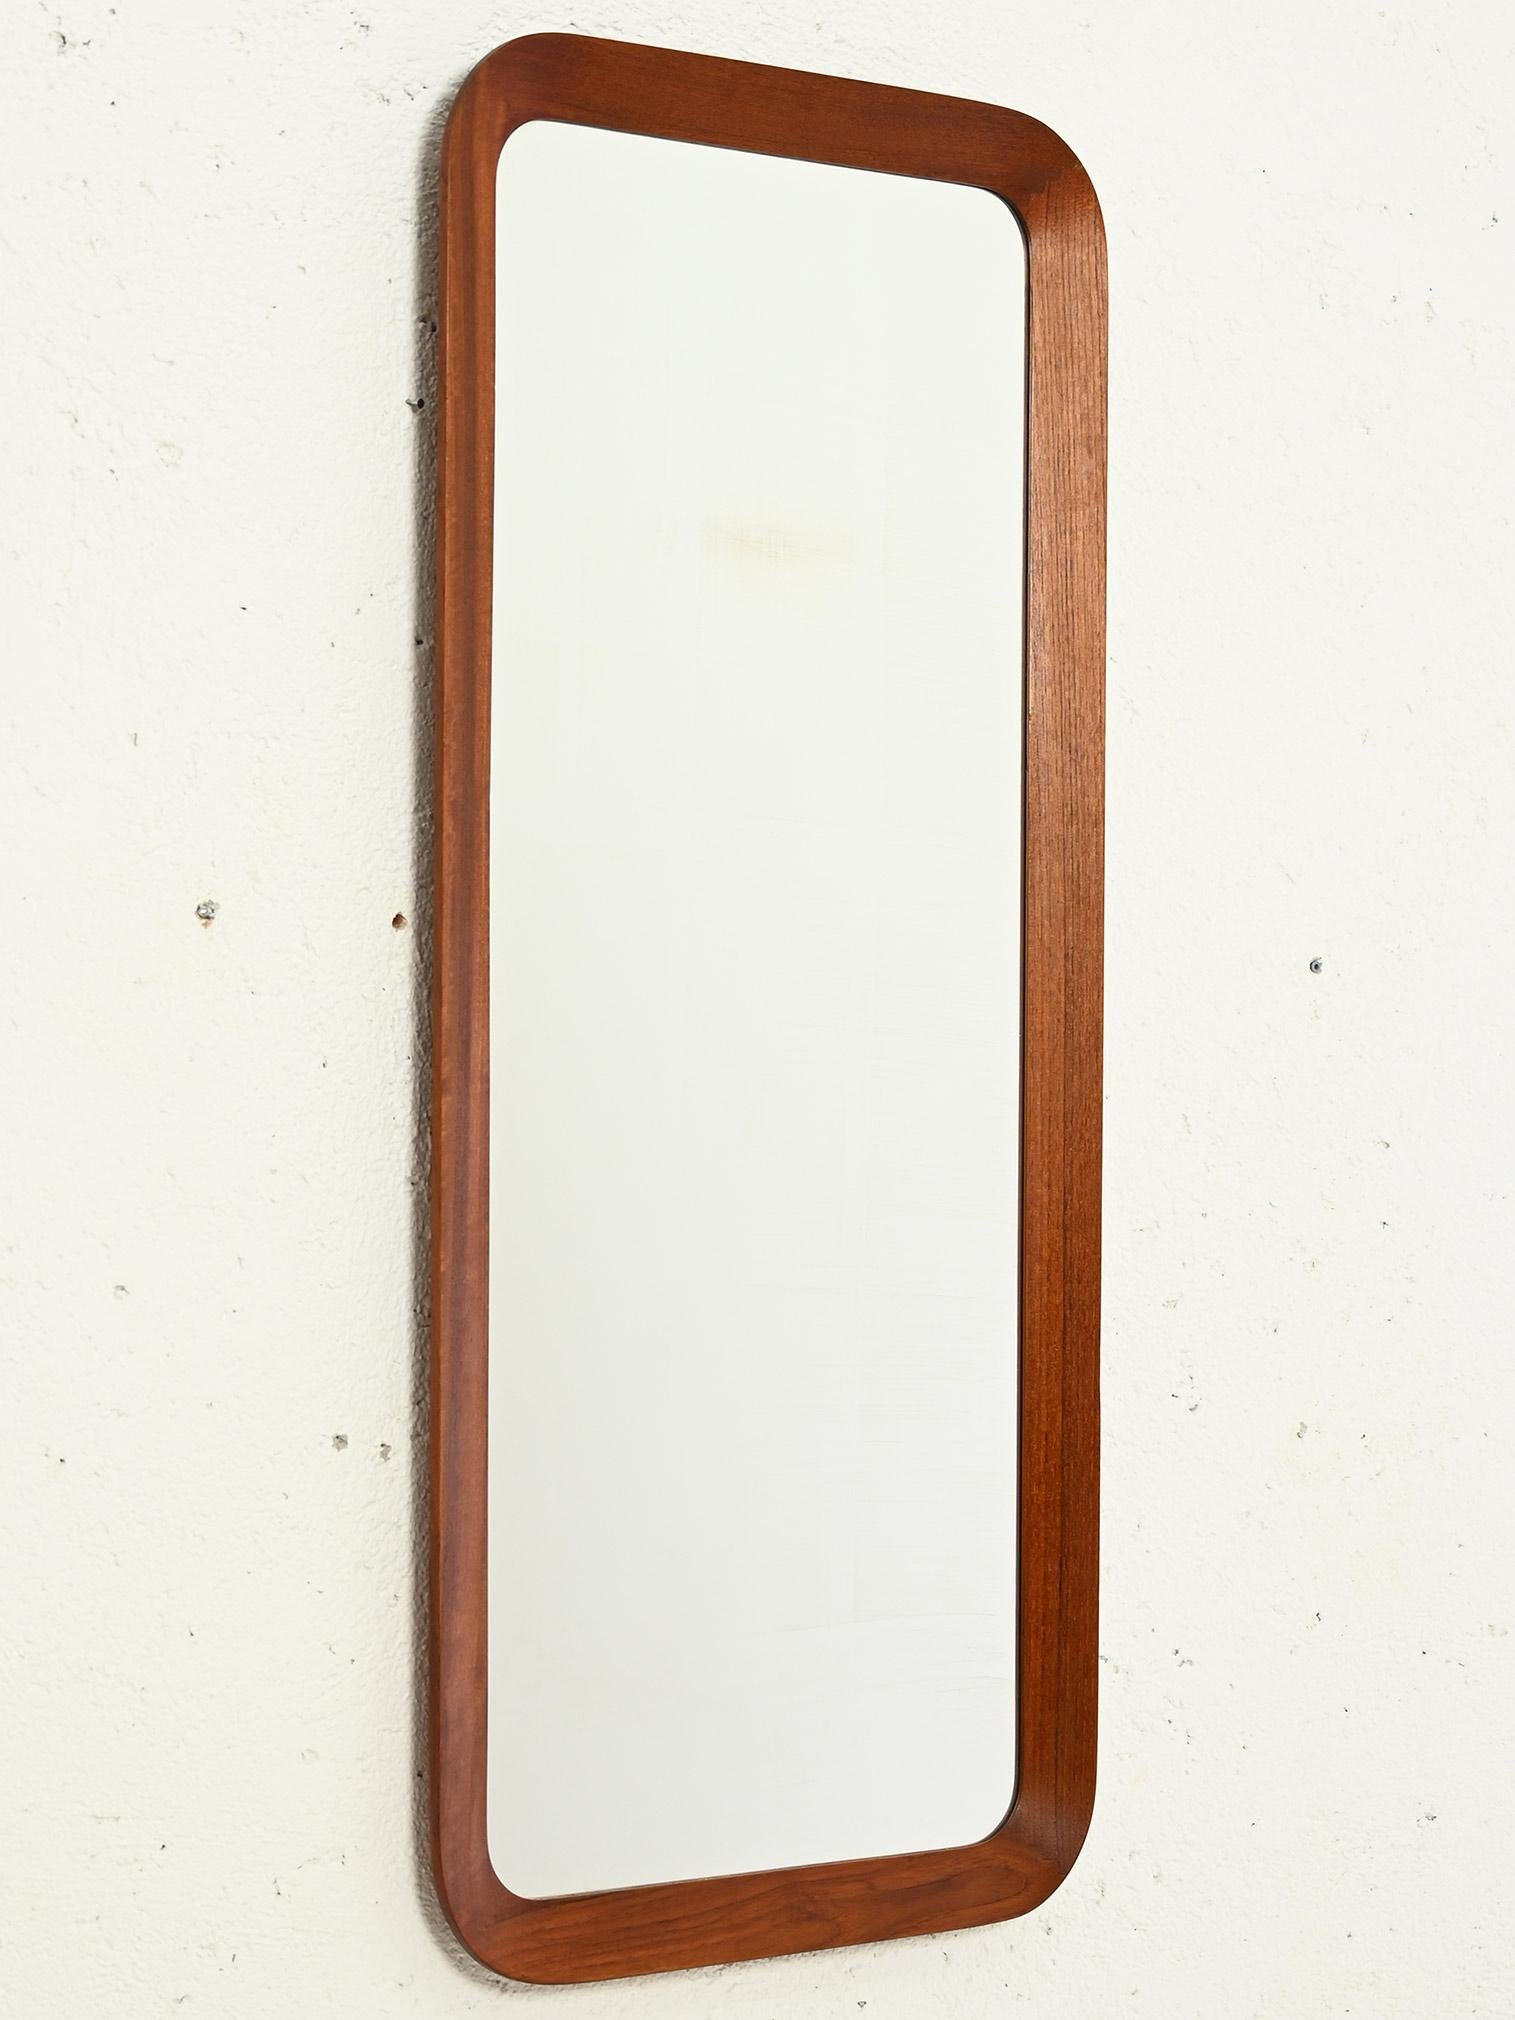 Vintage 1960s wood-framed mirror with rounded interior angles, featuring a thick, protruding frame. It adds style and three-dimensionality to the decor, giving it a distinctive touch. 

Good condition. May show some signs of age. Please pay